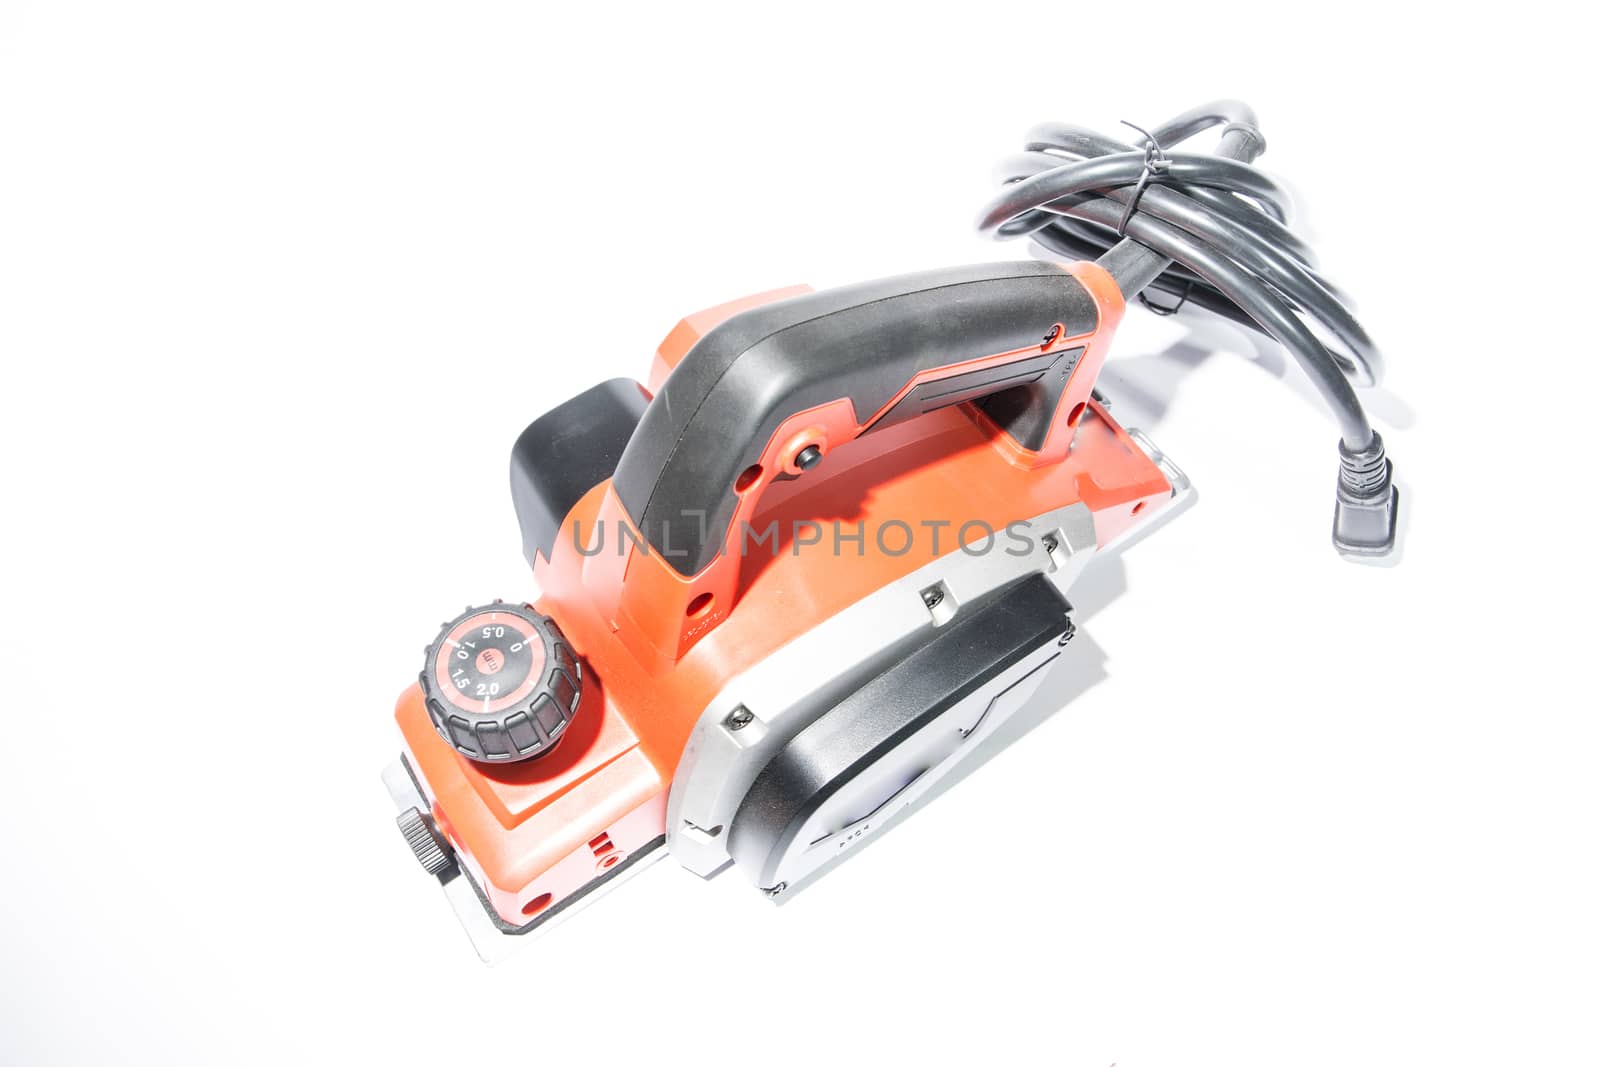 Construction equipment, electric wood planer on white background